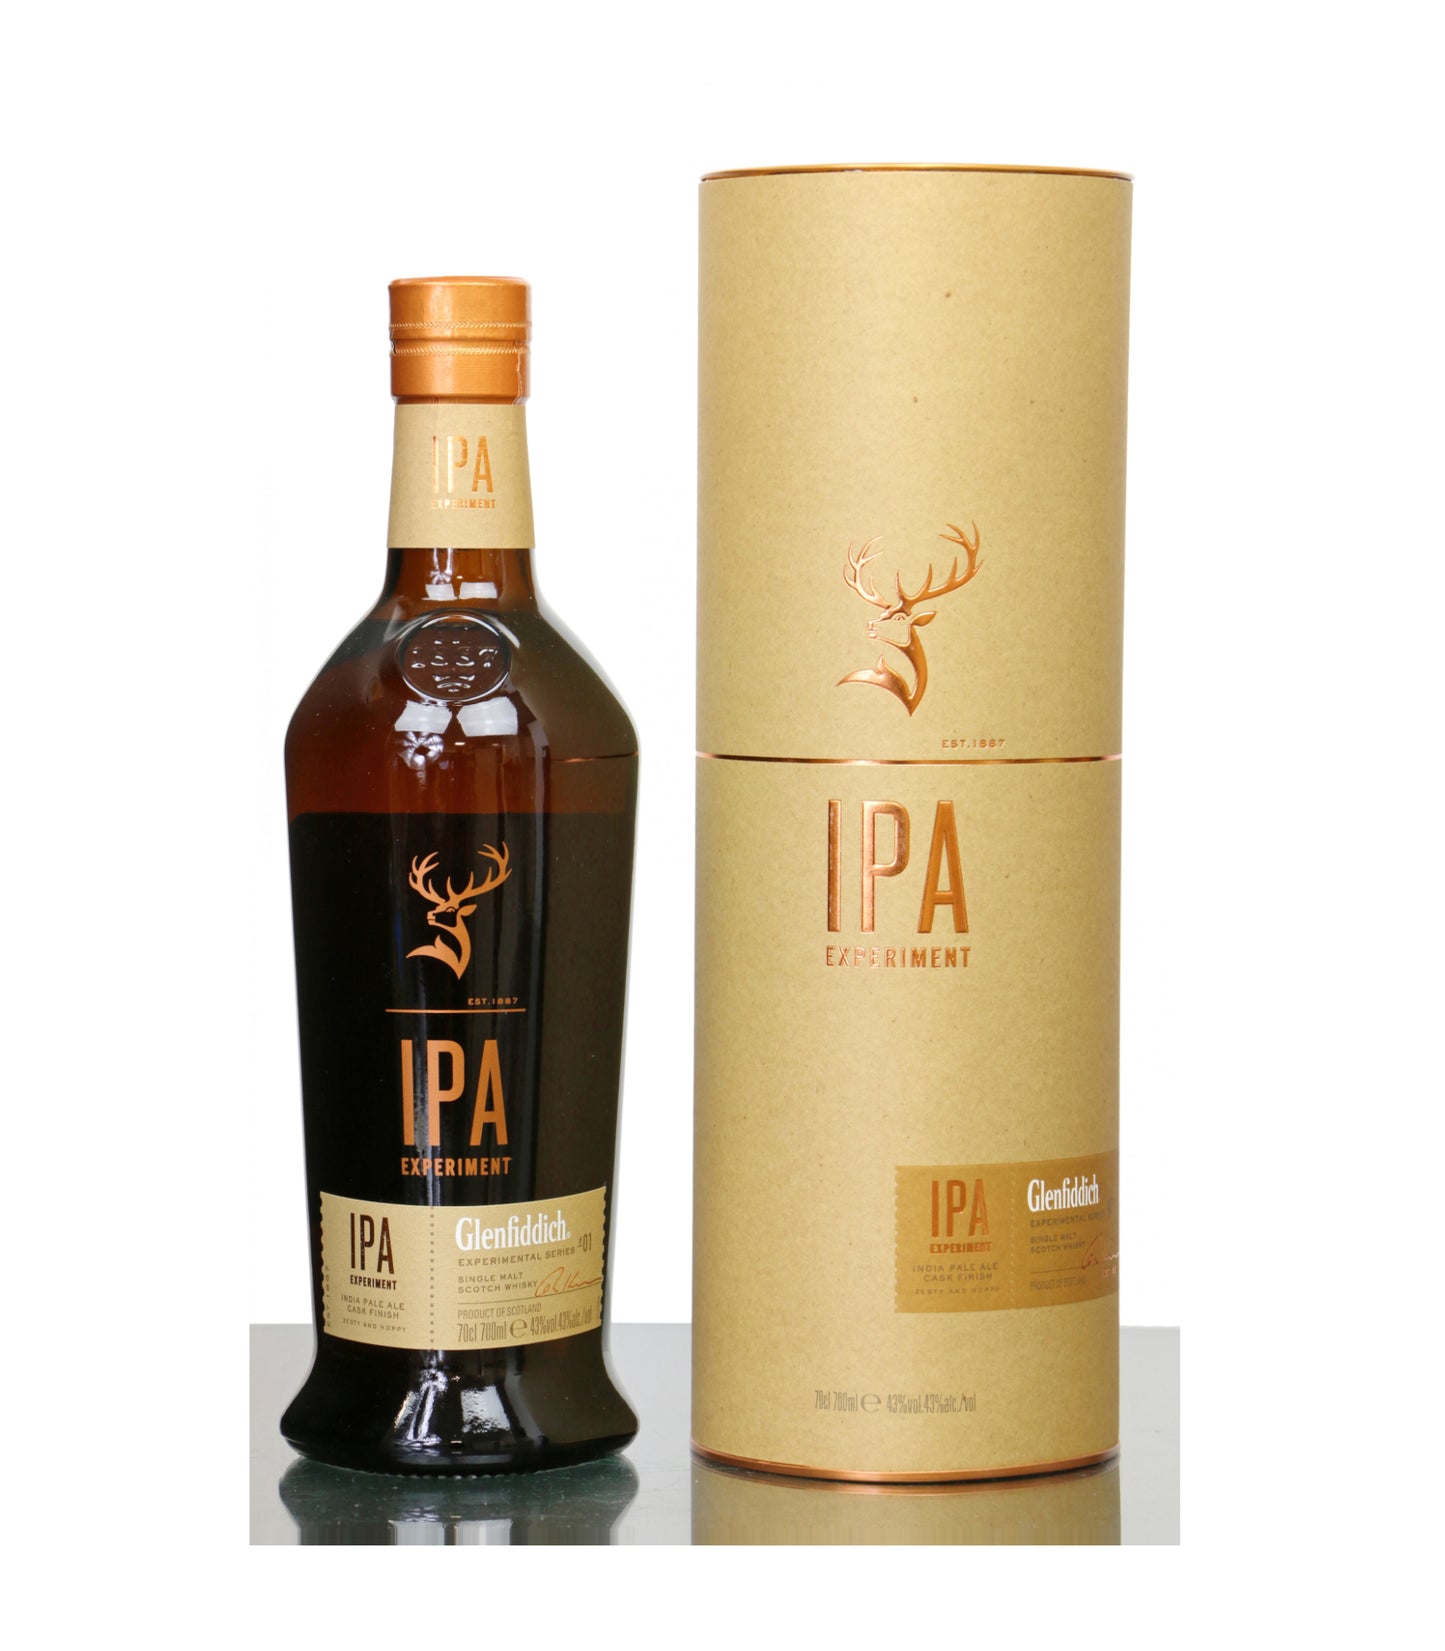 Glenfiddich IPA Experiment Whisky- Experimental Series (70cl; 43%)